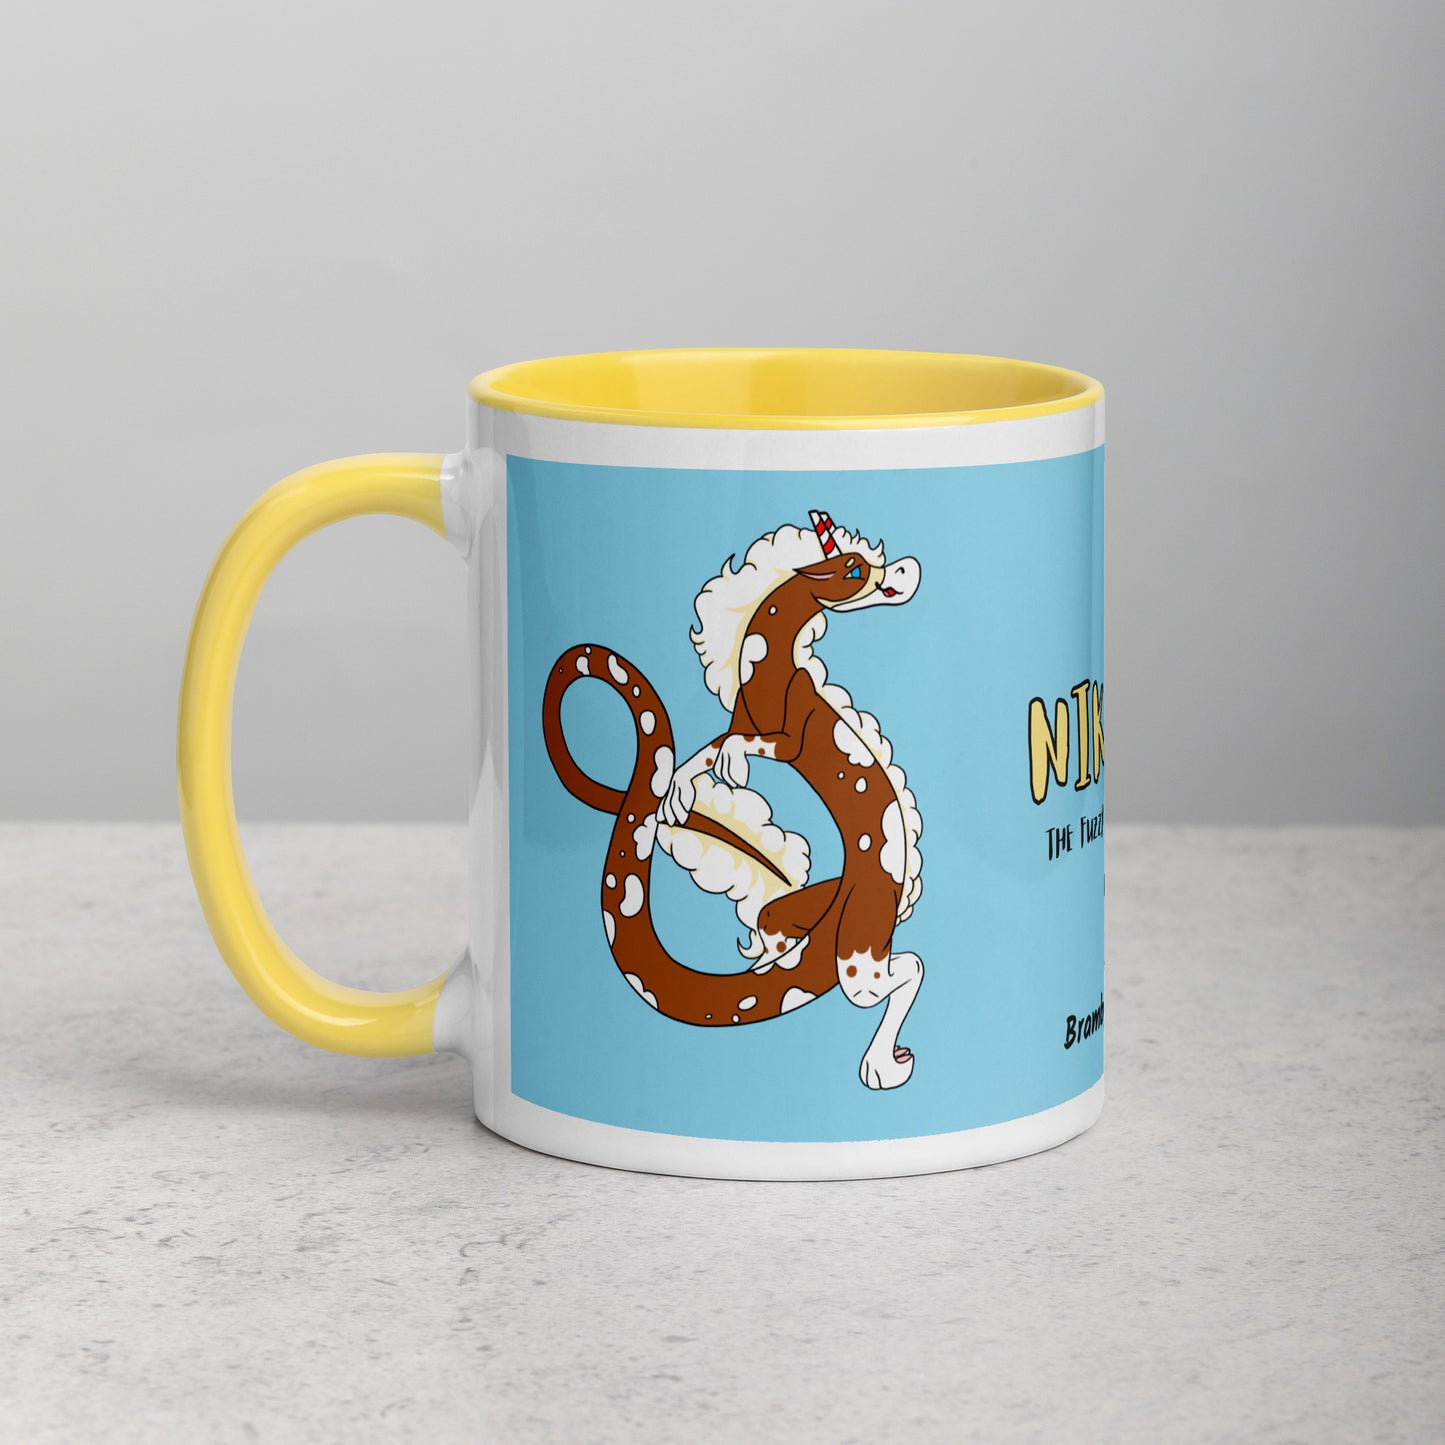 11 ounce ceramic mug with yellow handle, rim and inside color. Features double-sided image of Nikolai the Fuzzy Noodle Root beer float dragon on a light blue background. Mug is microwave and dishwasher safe.